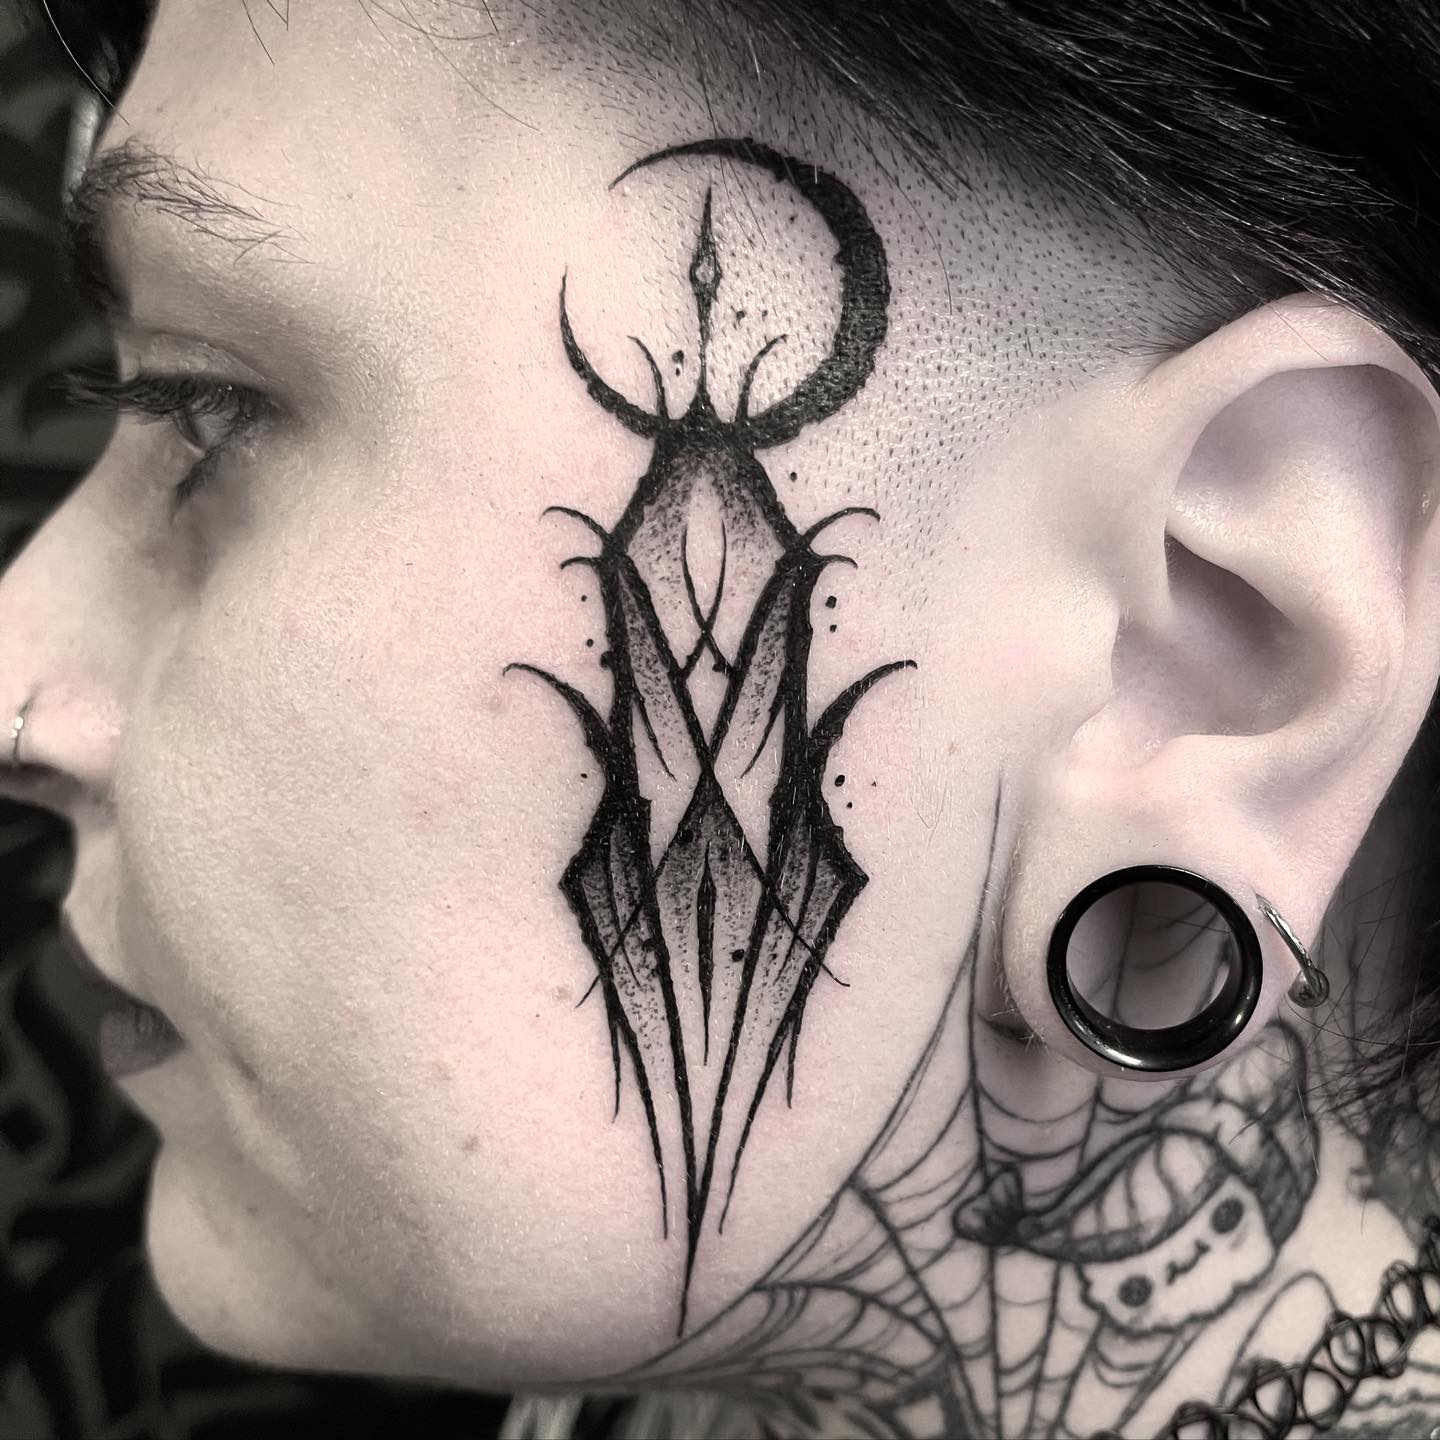 If you truly believe in dark powers, spirits, and ghosts, this will look amazing on you. Heads up since this big tattoo can be time-consuming.